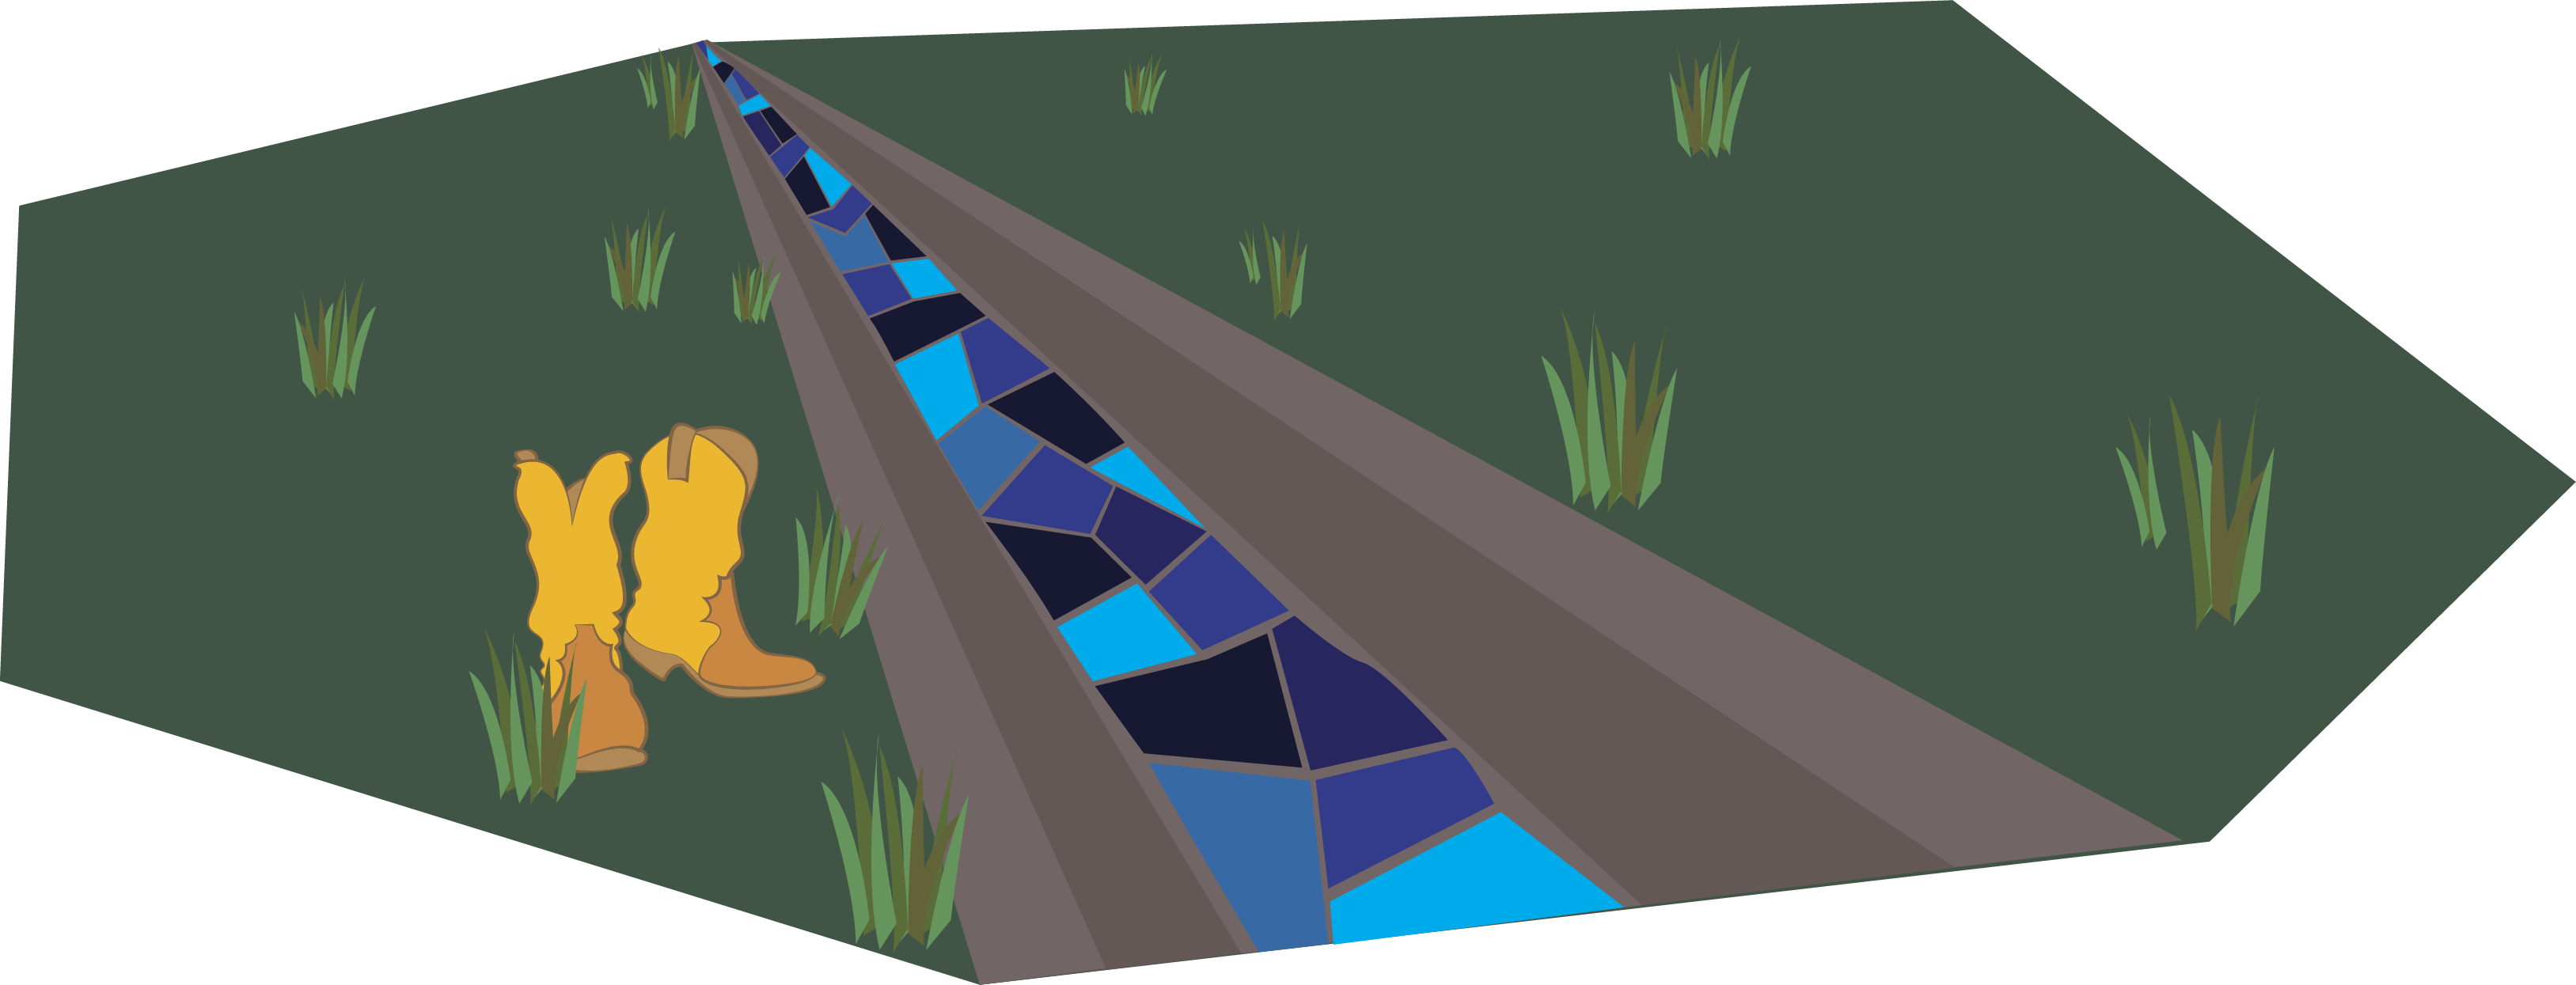 This is a graphic of an irrigation ditch